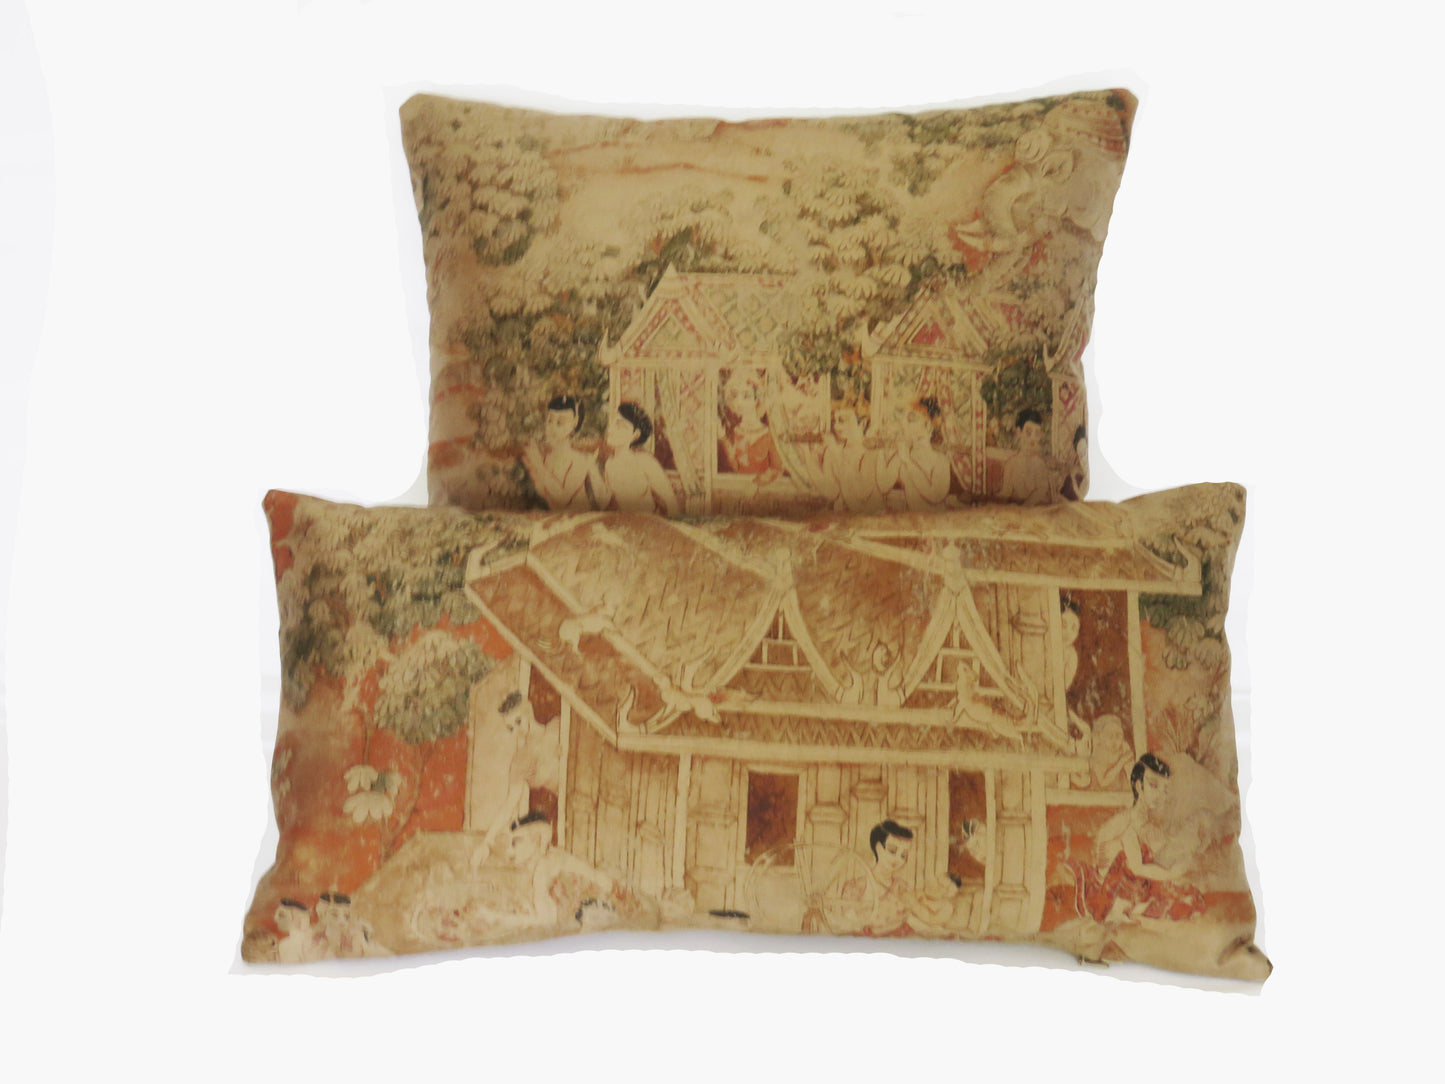 Thai Pictorial Pillow Cover - Jim Thompson Fabric,  Jim's Dream in Gold, 10x20" Elephant (H)